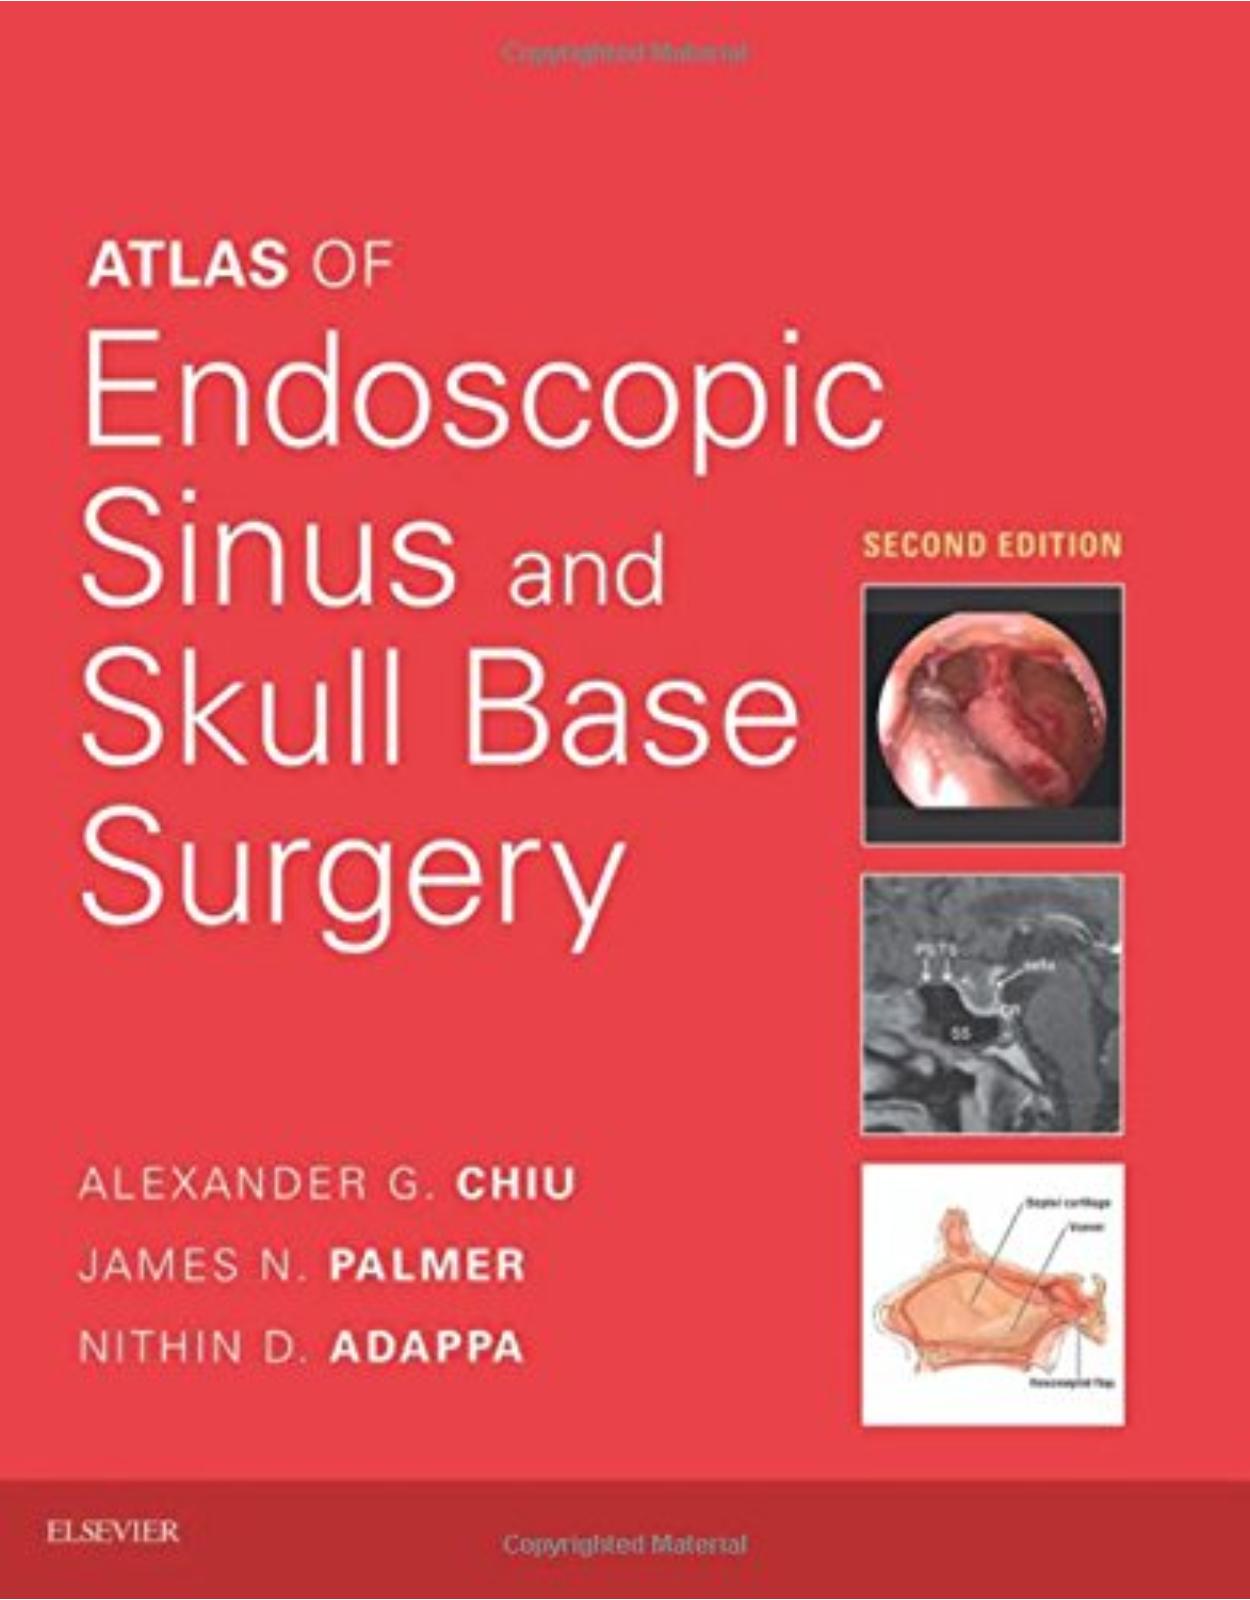 Atlas of Endoscopic Sinus and Skull Base Surgery, 2nd Edition